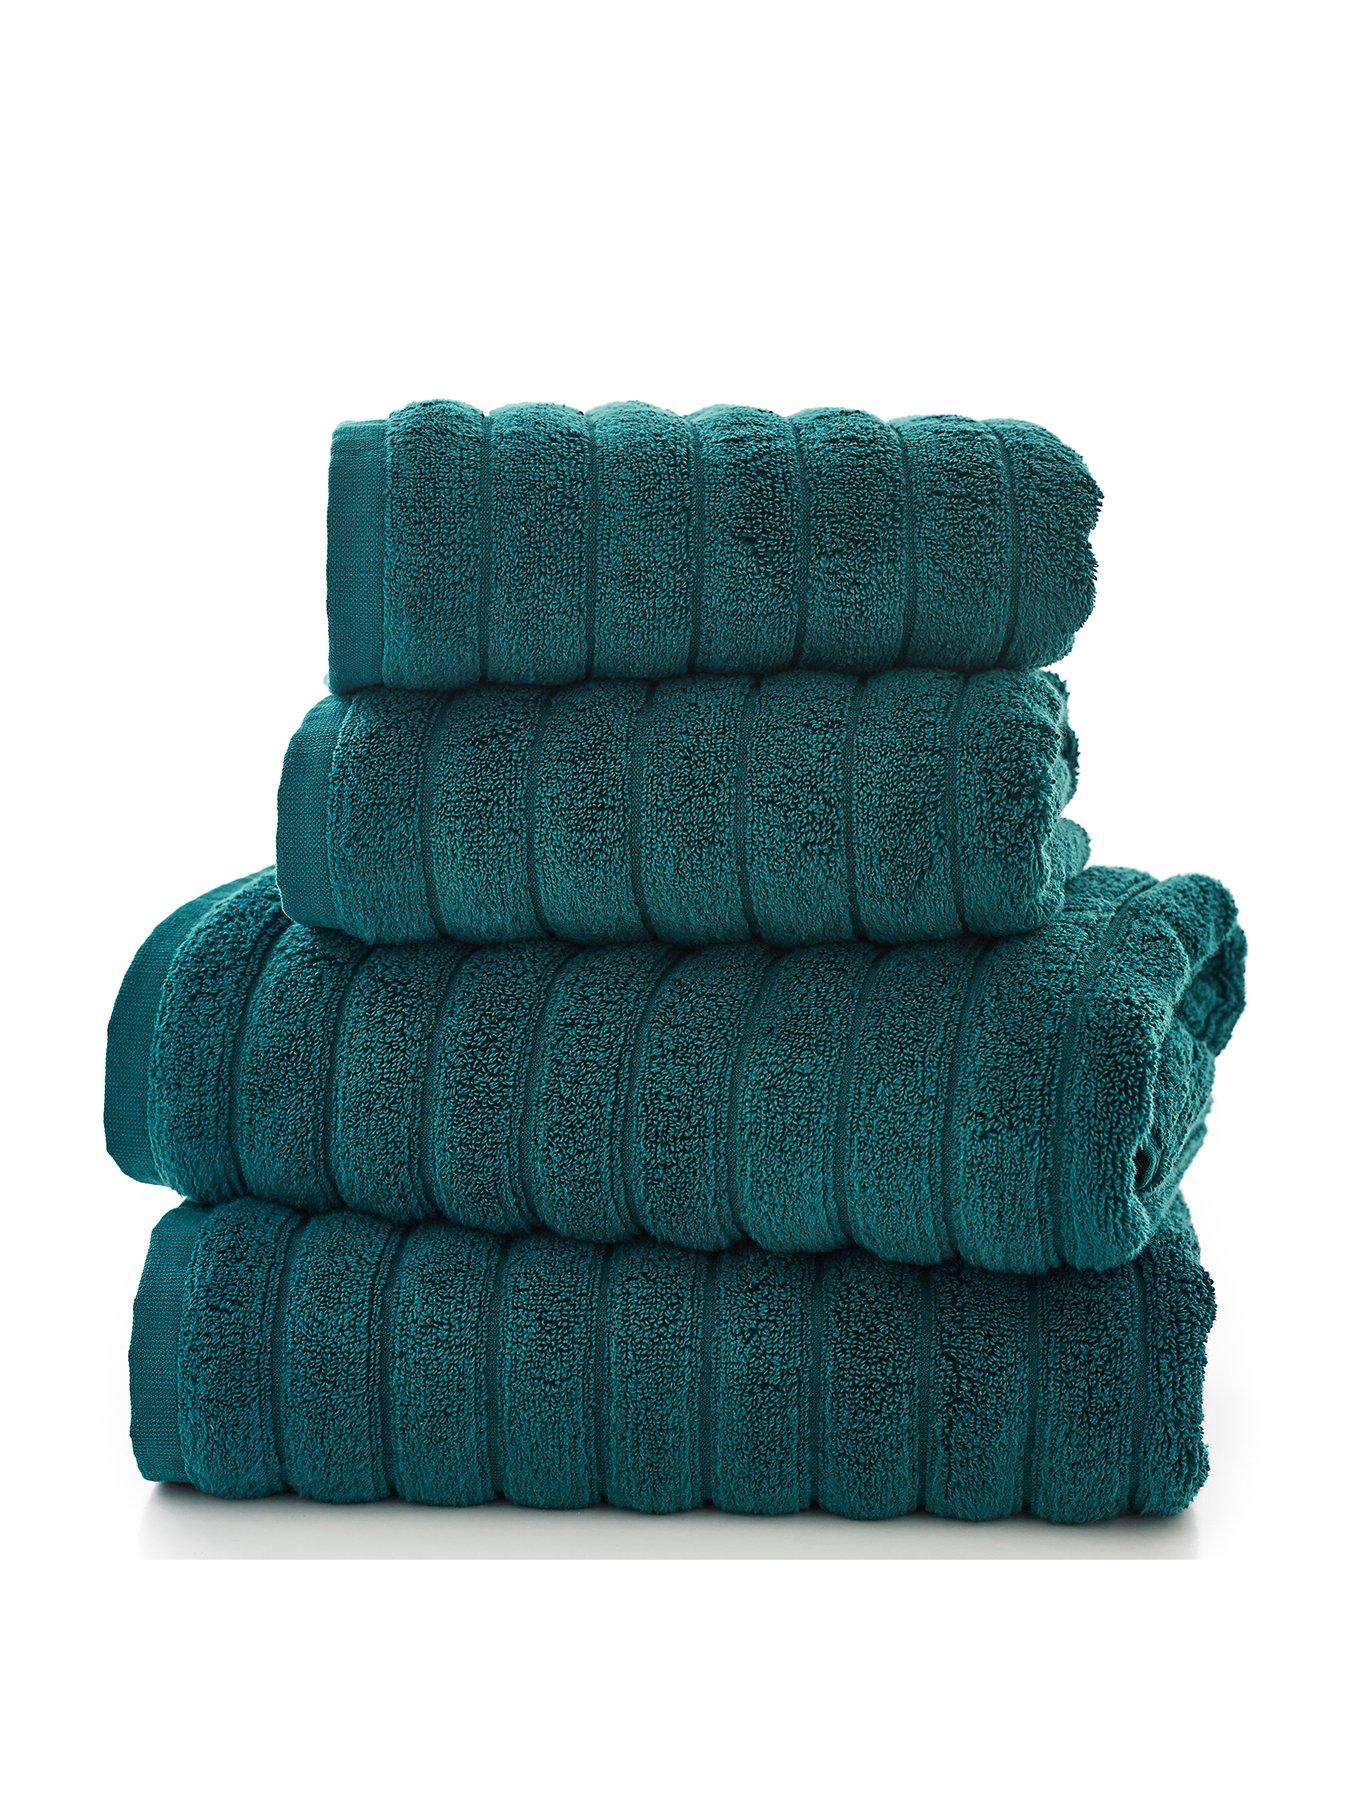 Mush Ultra Soft & Super Absorbent Towels | 600 GSM Bamboo Bath Towel Set |  29 X 59 Inches (Pink, Sky Blue, Navy Blue, Olive Green) Pack of 4